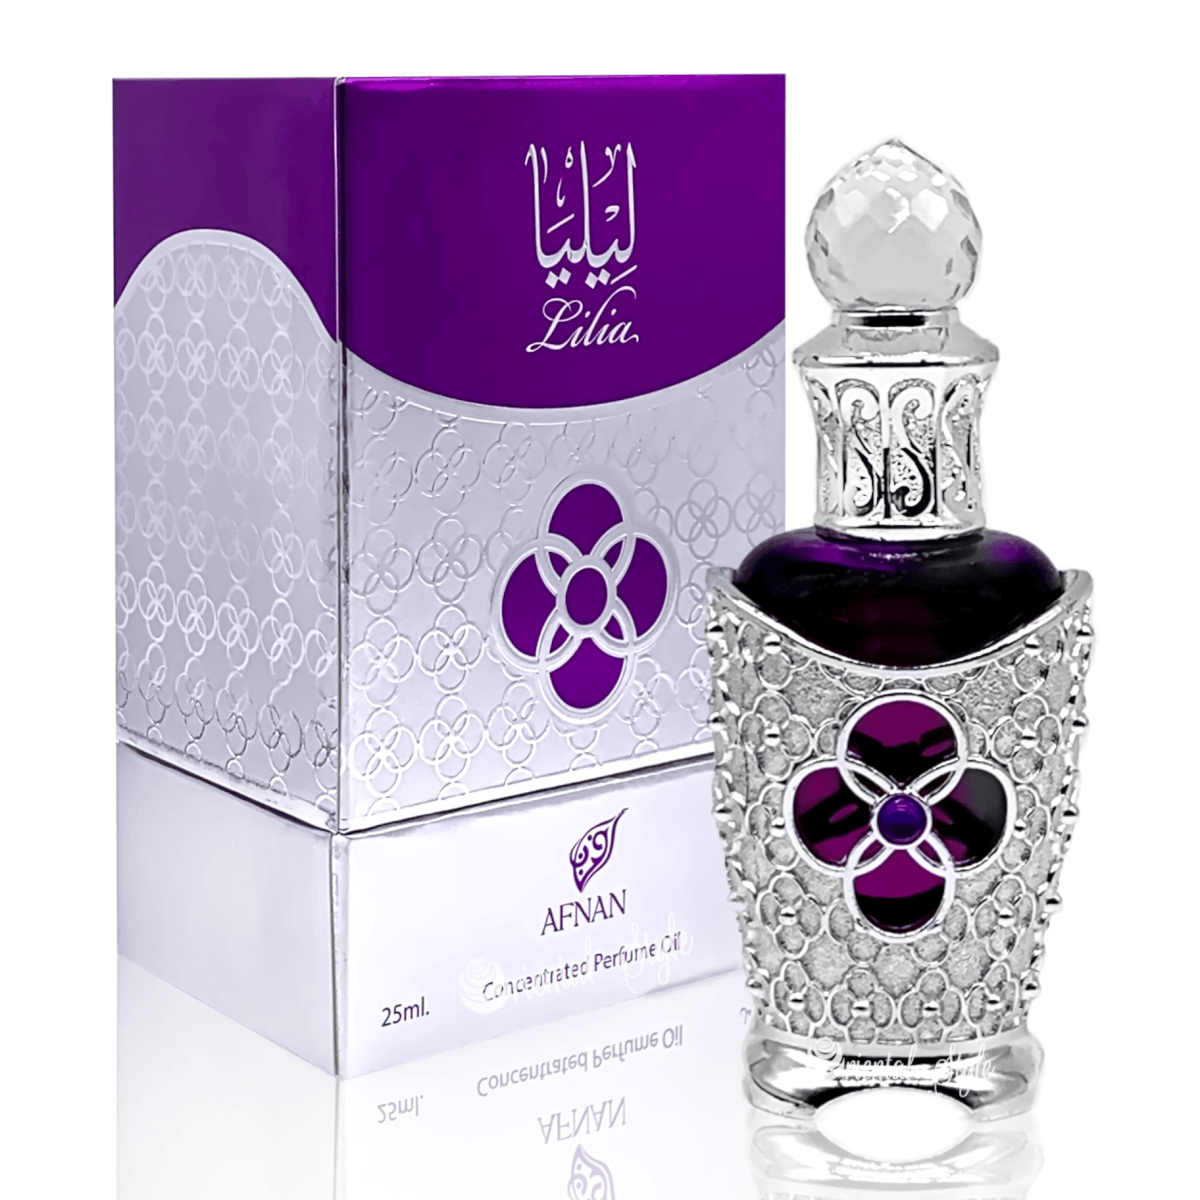 Lilia Concentrated Perfume Oil / Attar 25Ml By Afnan